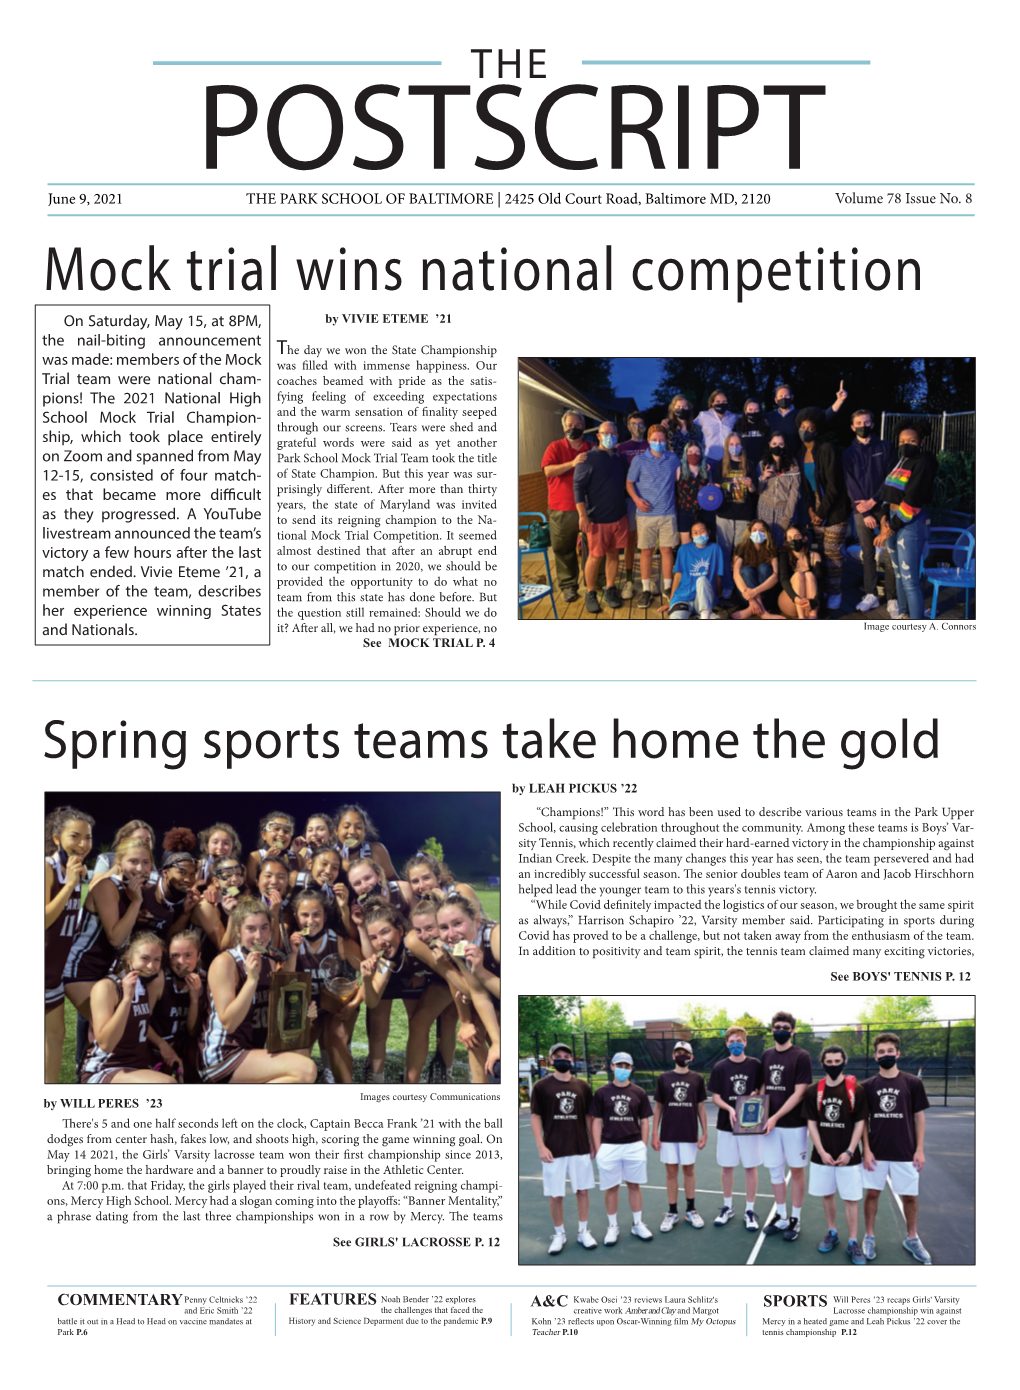 Mock Trial Wins National Competition